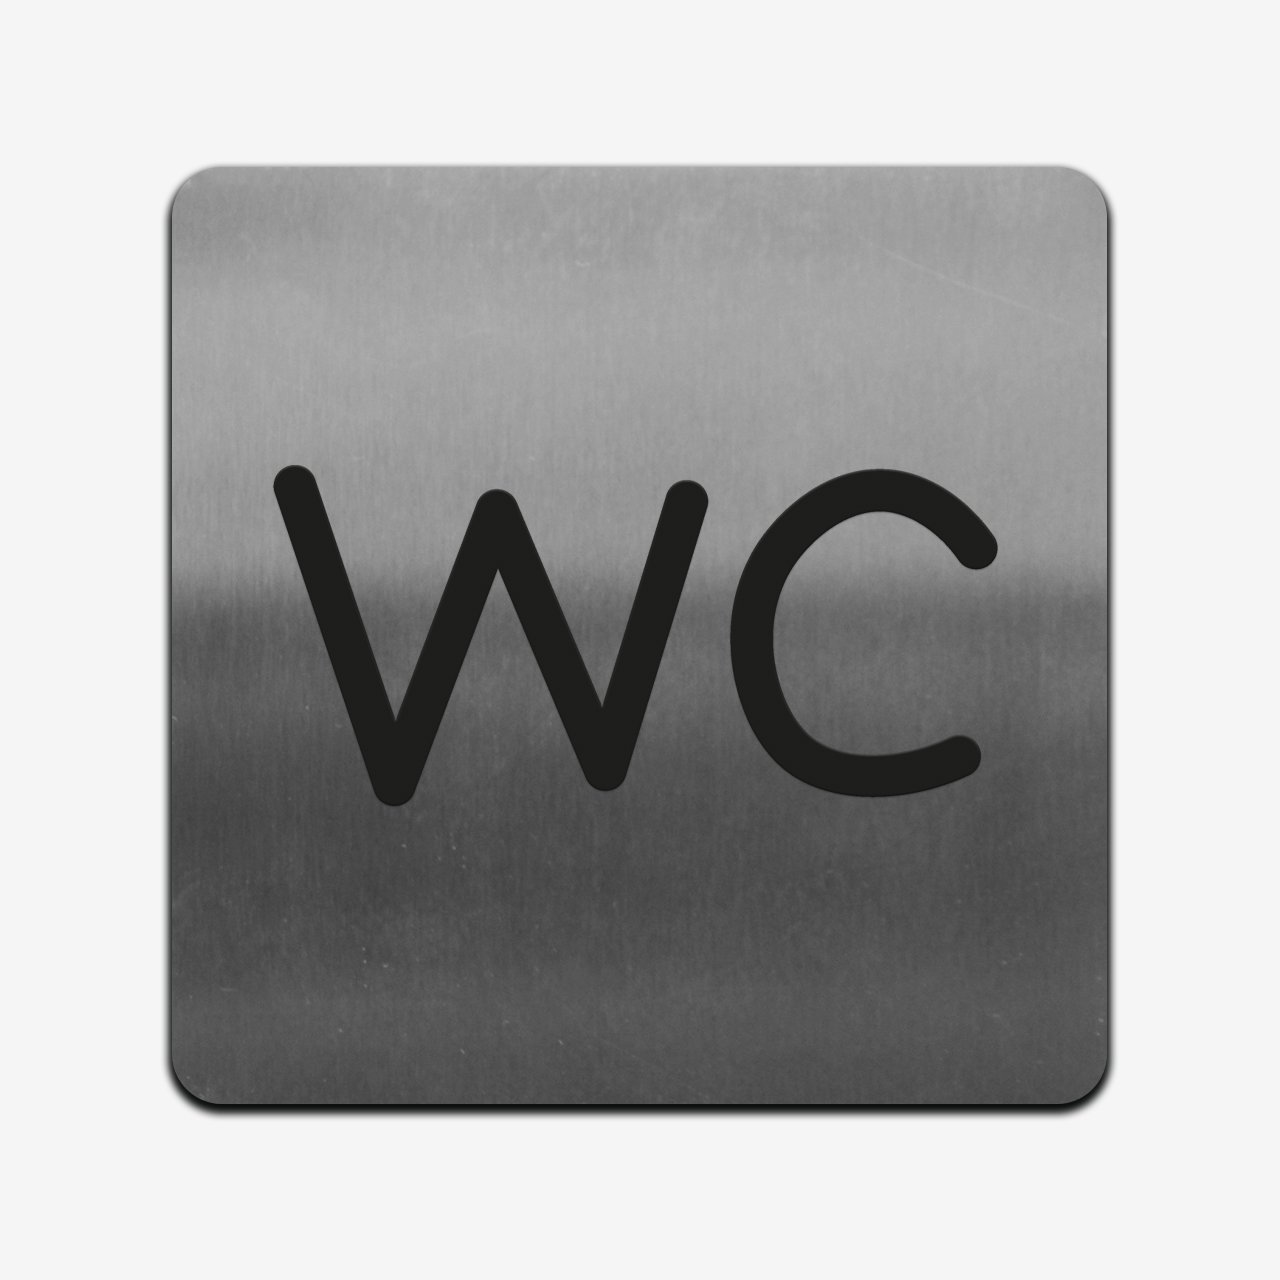 WC - Stainless Steel Sign Bathroom Signs square Bsign